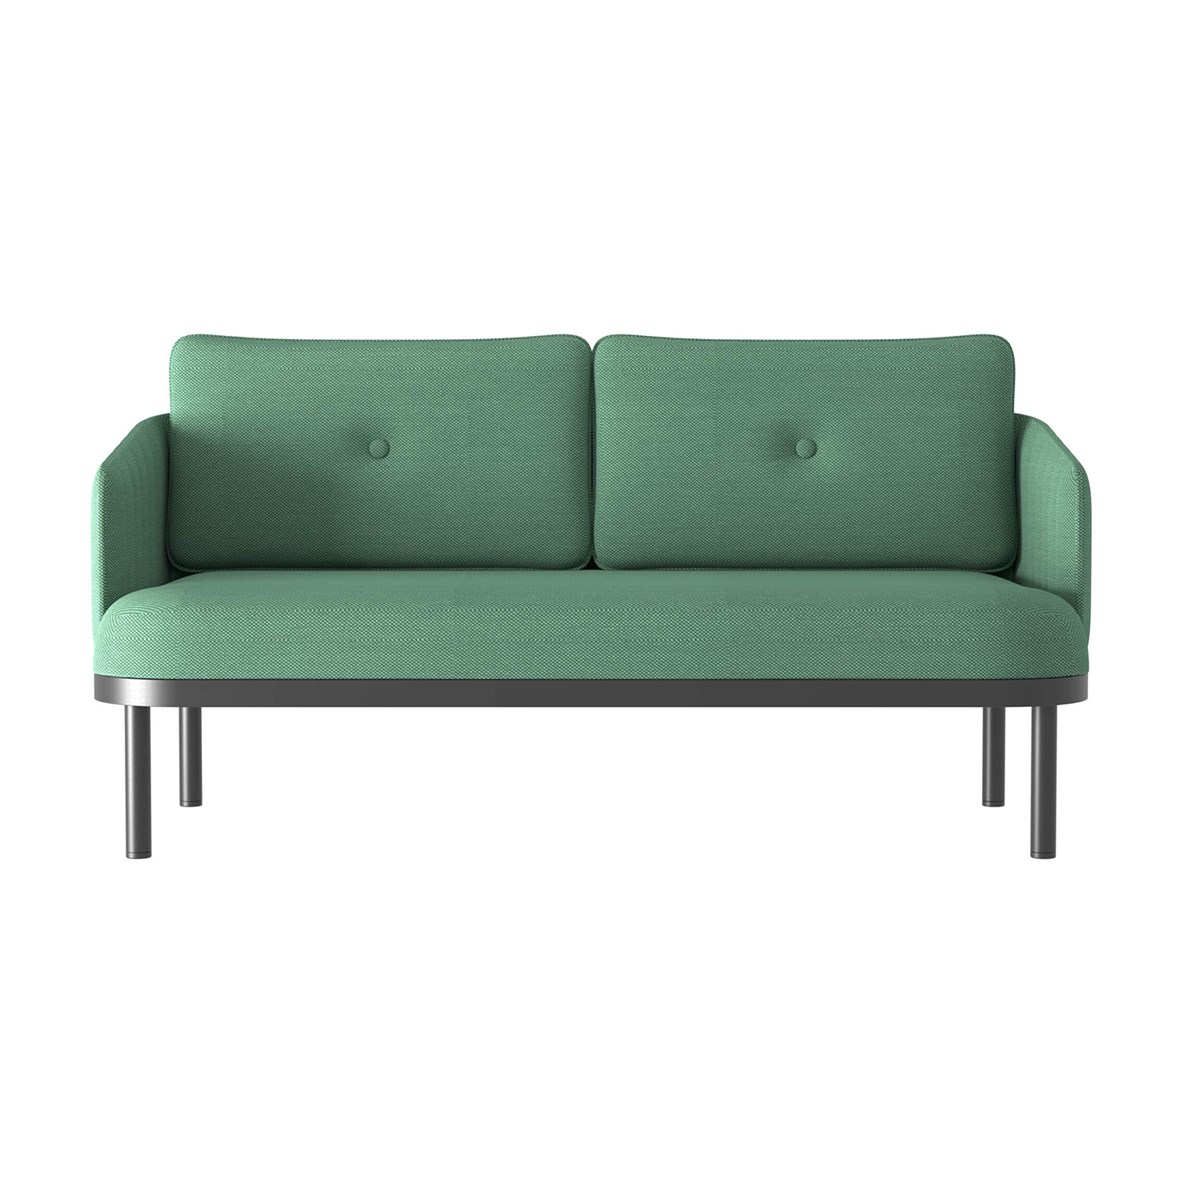 Neospace-Dwell-Sofa-Short-Back-Contract-Matisse-2